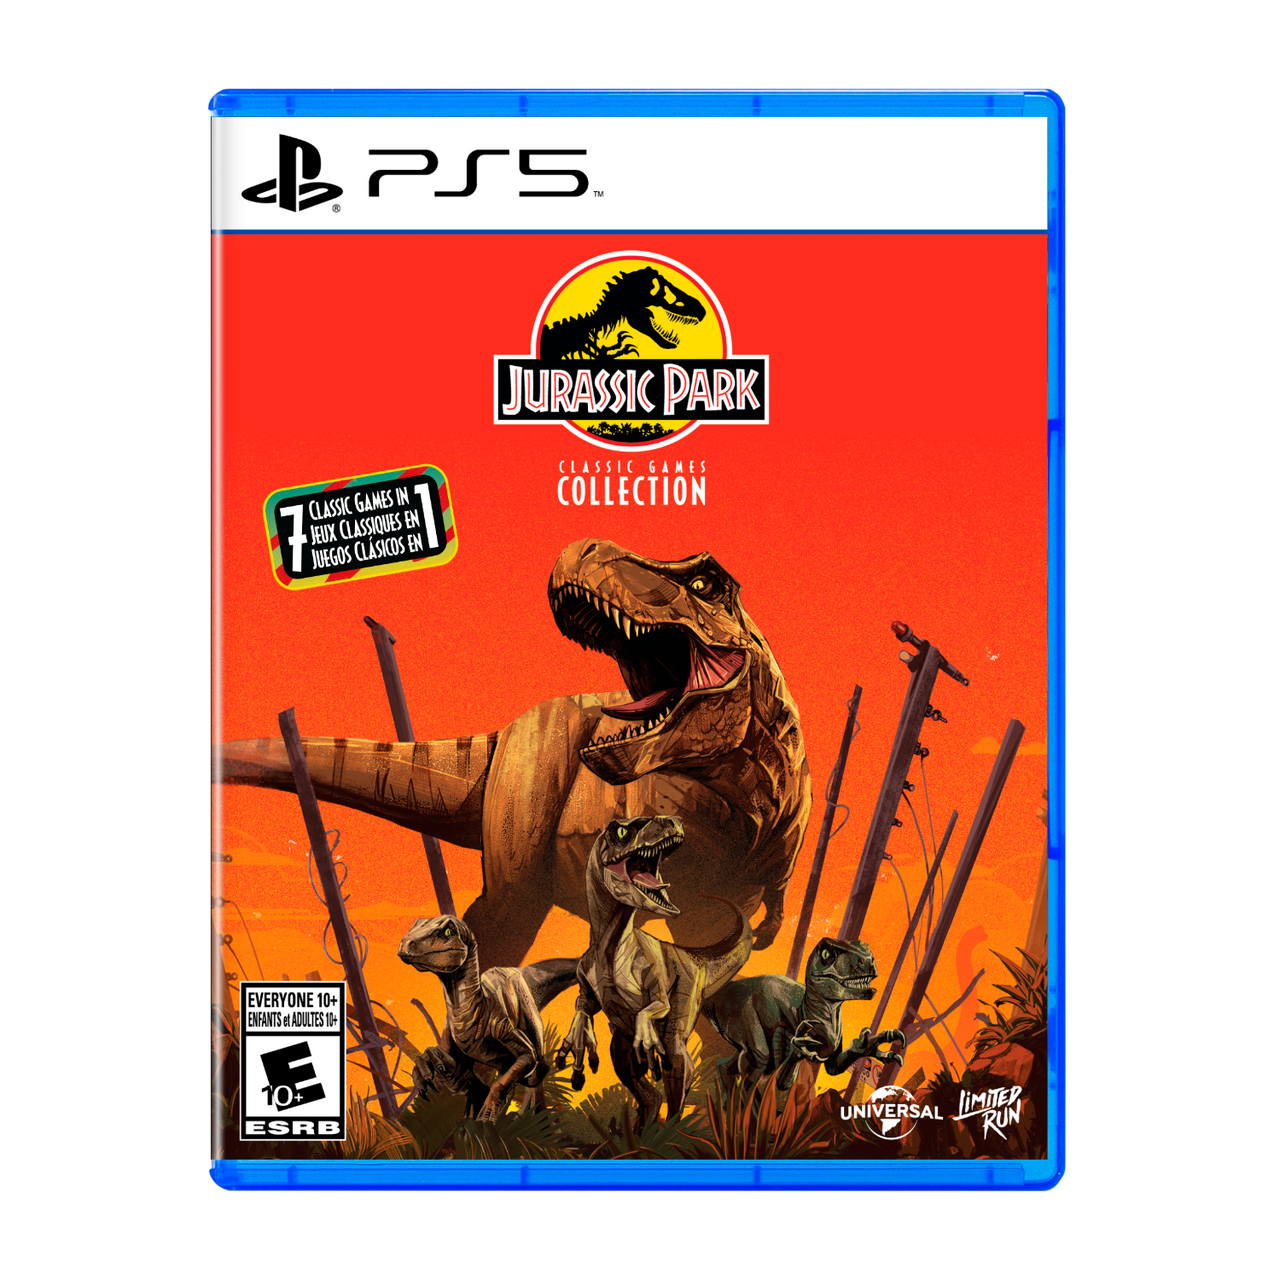 Product Image : This is brand new.<br>HOLD ON TO YOUR BUTTS! THE 8- AND 16-BIT ERA OF JURASSIC PARK GAMES HAS RETURNED, COMMEMORATING 30 YEARS OF THE ICONIC FILM!

This release includes a lineup of seven classic titles updated to include save state support, new in-game maps, and various quality-of-life fixes.

Jurassic Park 8-BIT
Jurassic Park PORTABLE
Jurassic Park 16-BIT
Jurassic Park GENESIS
Jurassic Park Part 2: The Chaos Continues 16-BIT
Jurassic Park Part 2: The Chaos Continues PORTABLE
Jurassic P